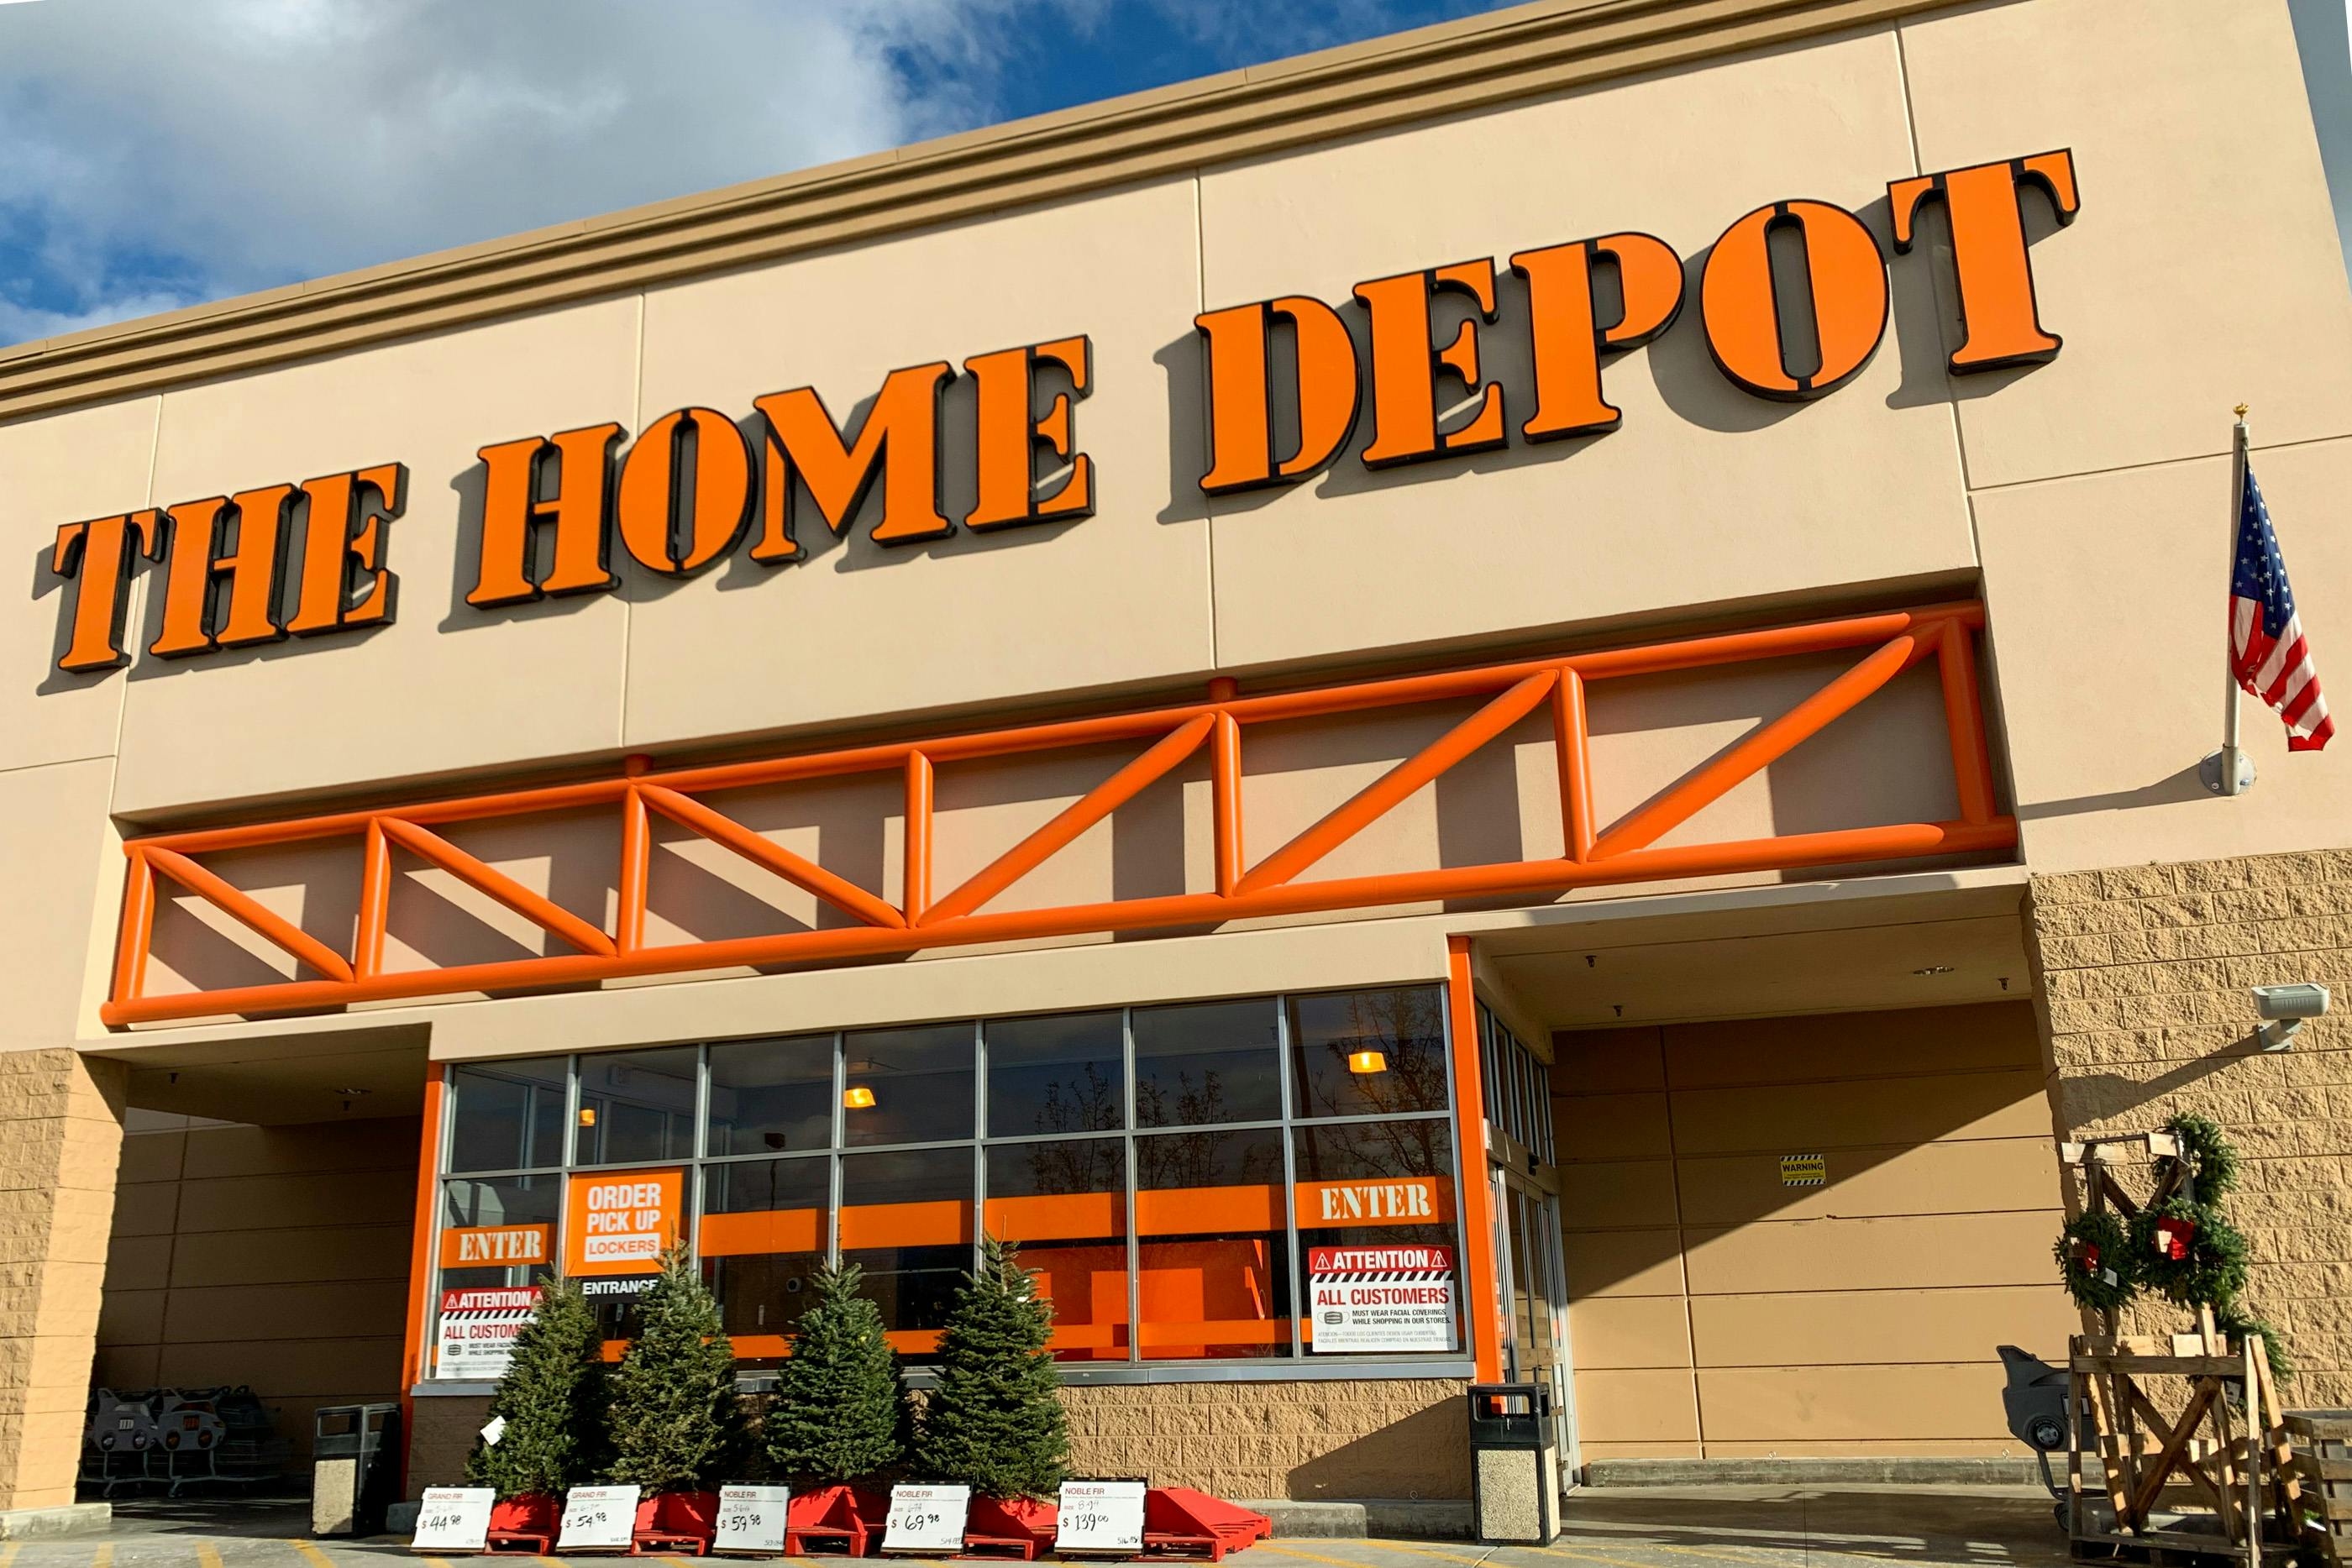 Is Home Depot Open on Thanksgiving & Other EndoftheYear Holidays